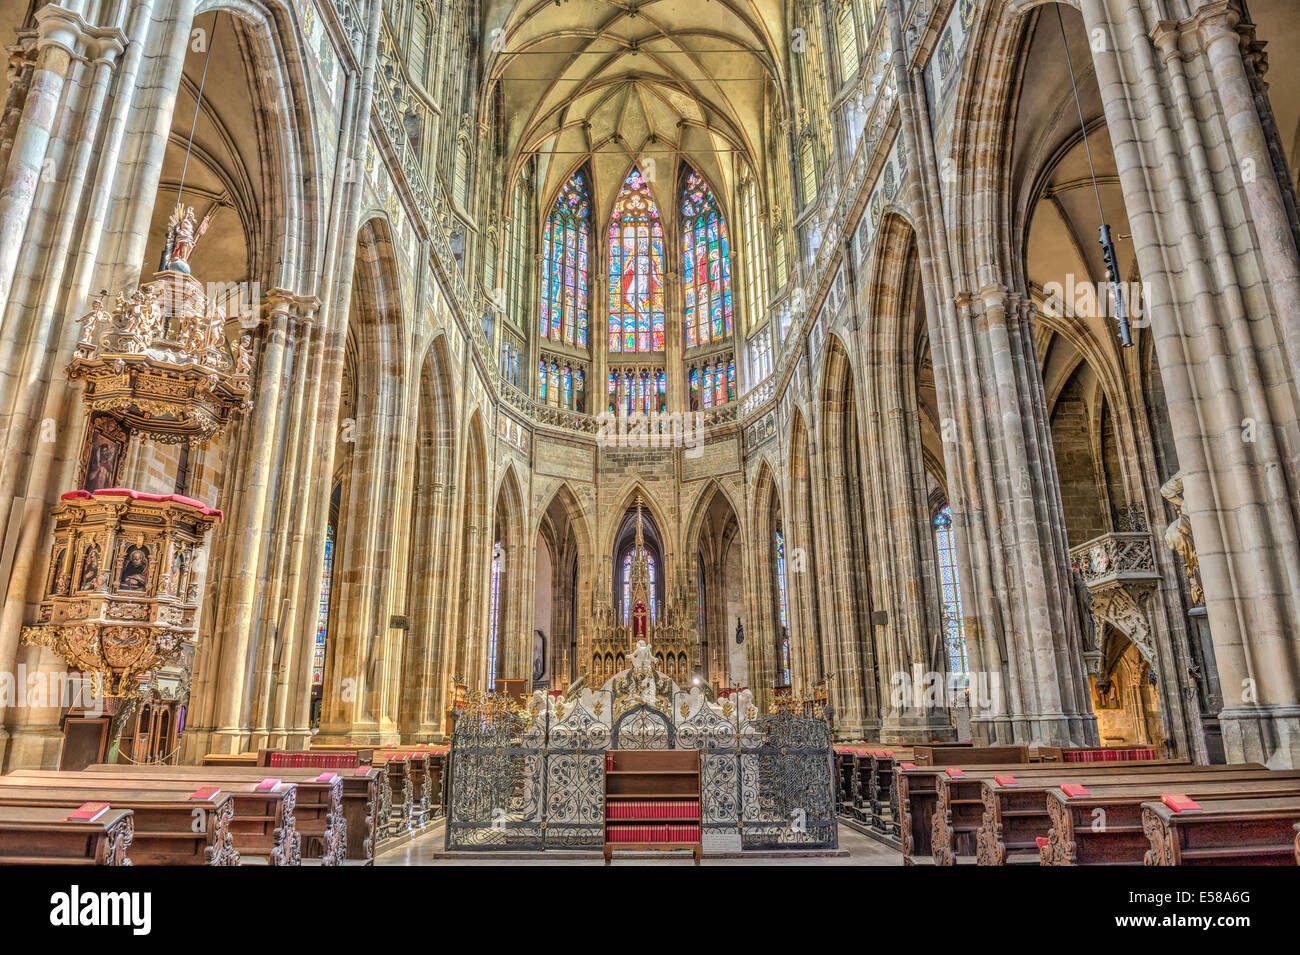 Interior of St. Vitus Cathedral in Prague, Czech Republic Stock Photo